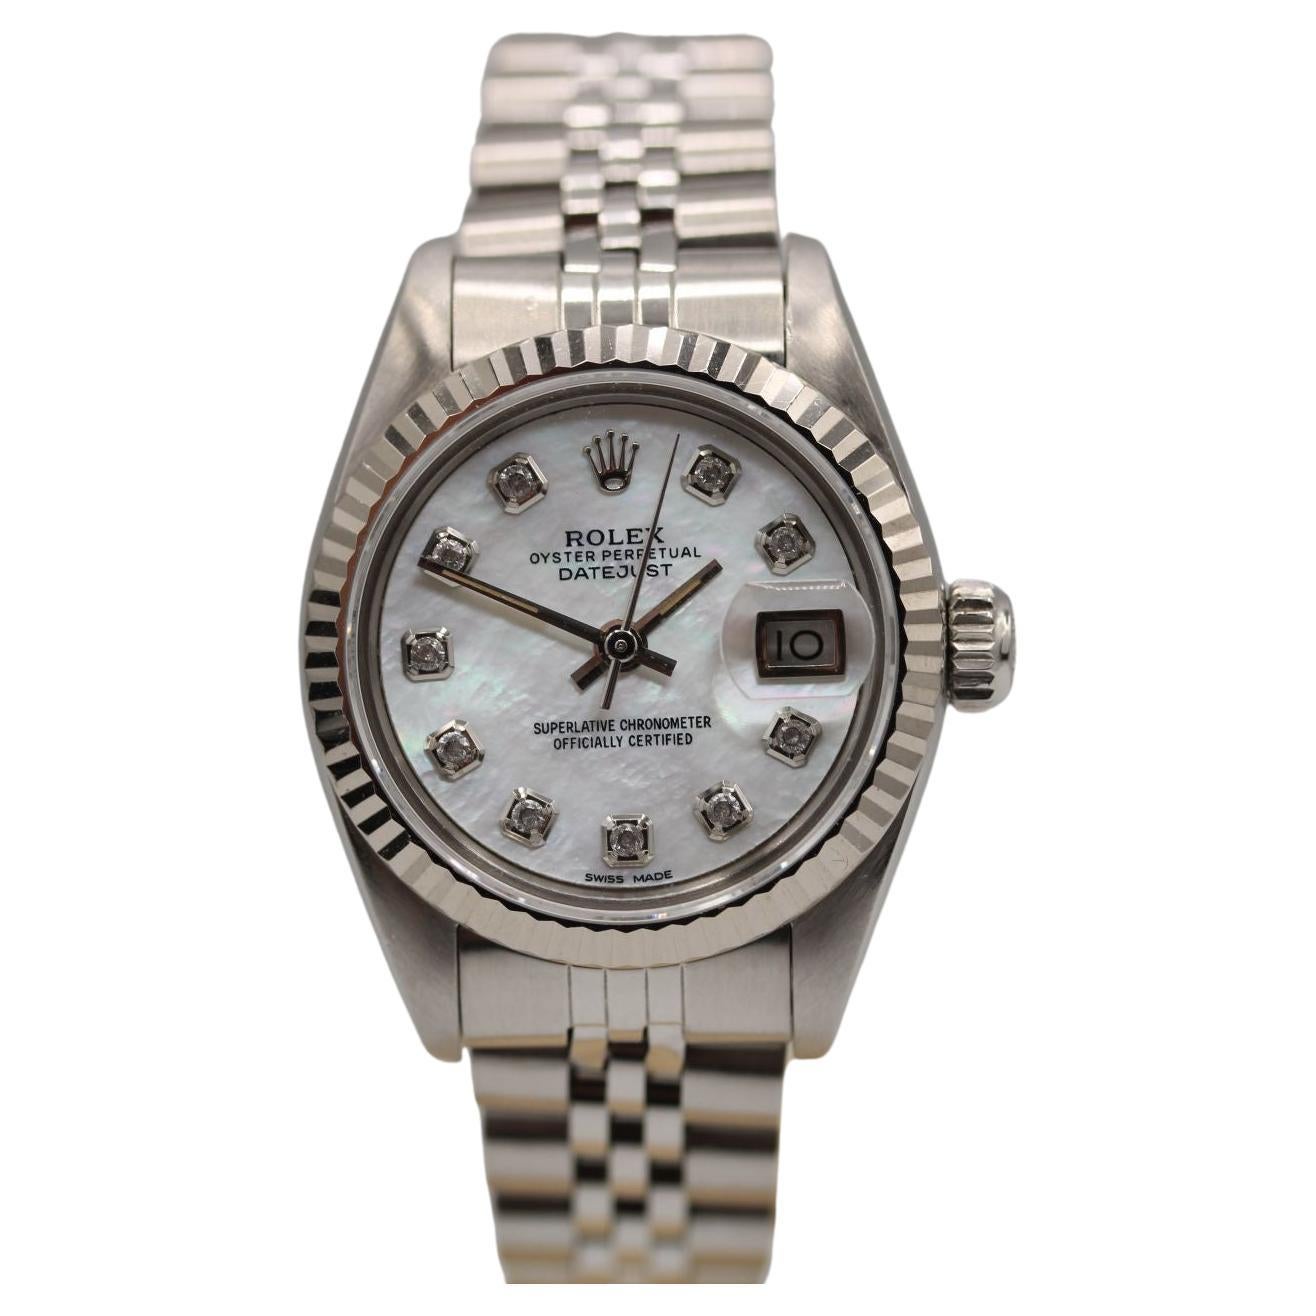 This beautiful Rolex Lady Datejust is presented in excellent condition accompanied with original Rolex papers dated April 1987. Also included is the original box along, swing tag, manuals as well as our 12-month warranty. 

This elegant piece